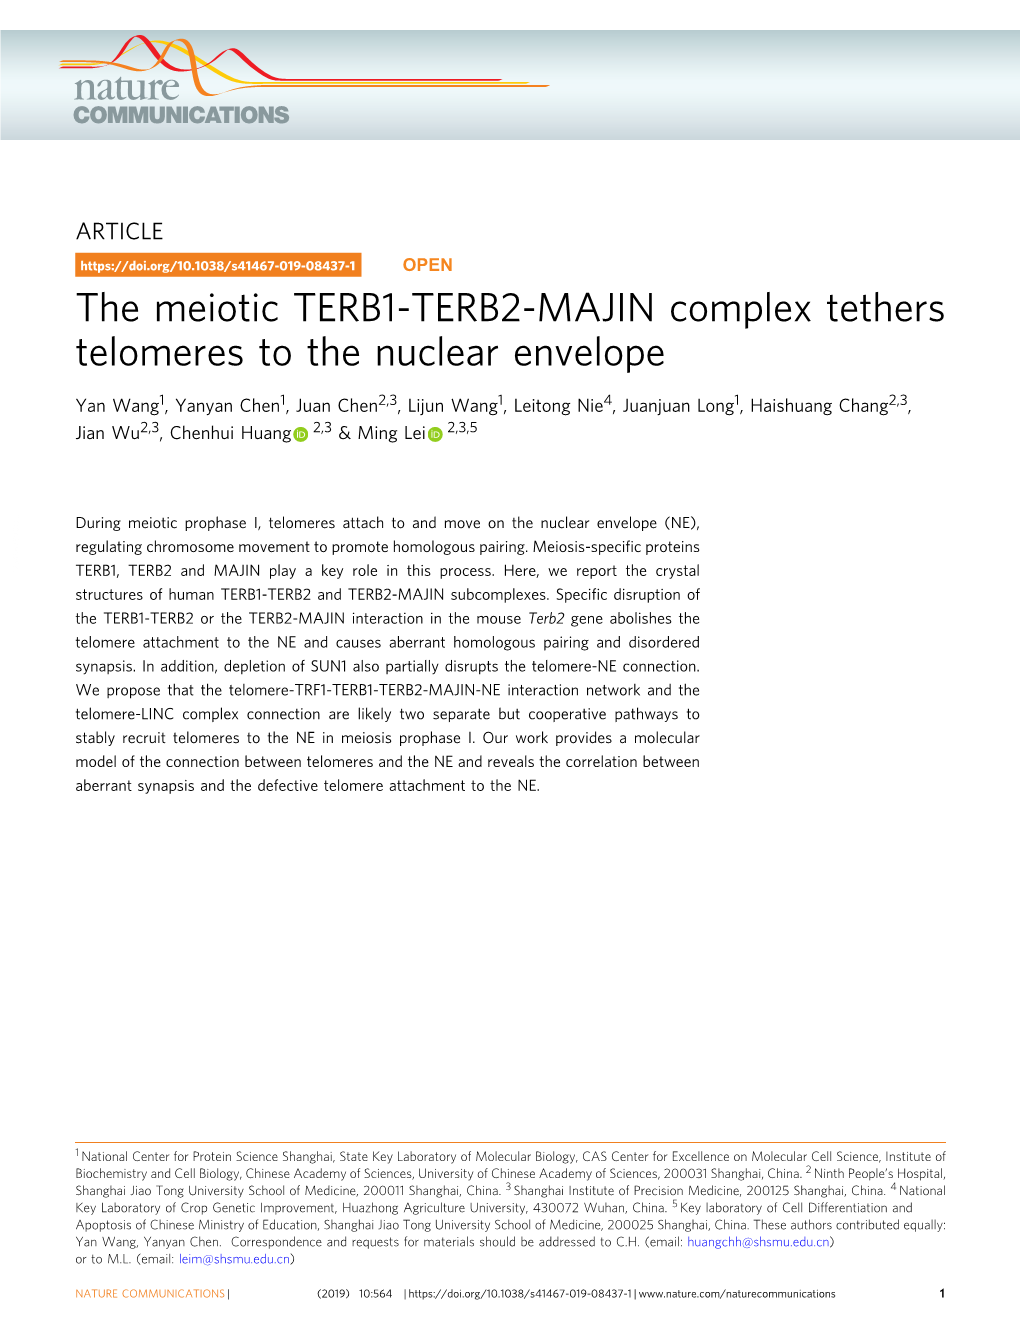 The Meiotic TERB1-TERB2-MAJIN Complex Tethers Telomeres to the Nuclear Envelope